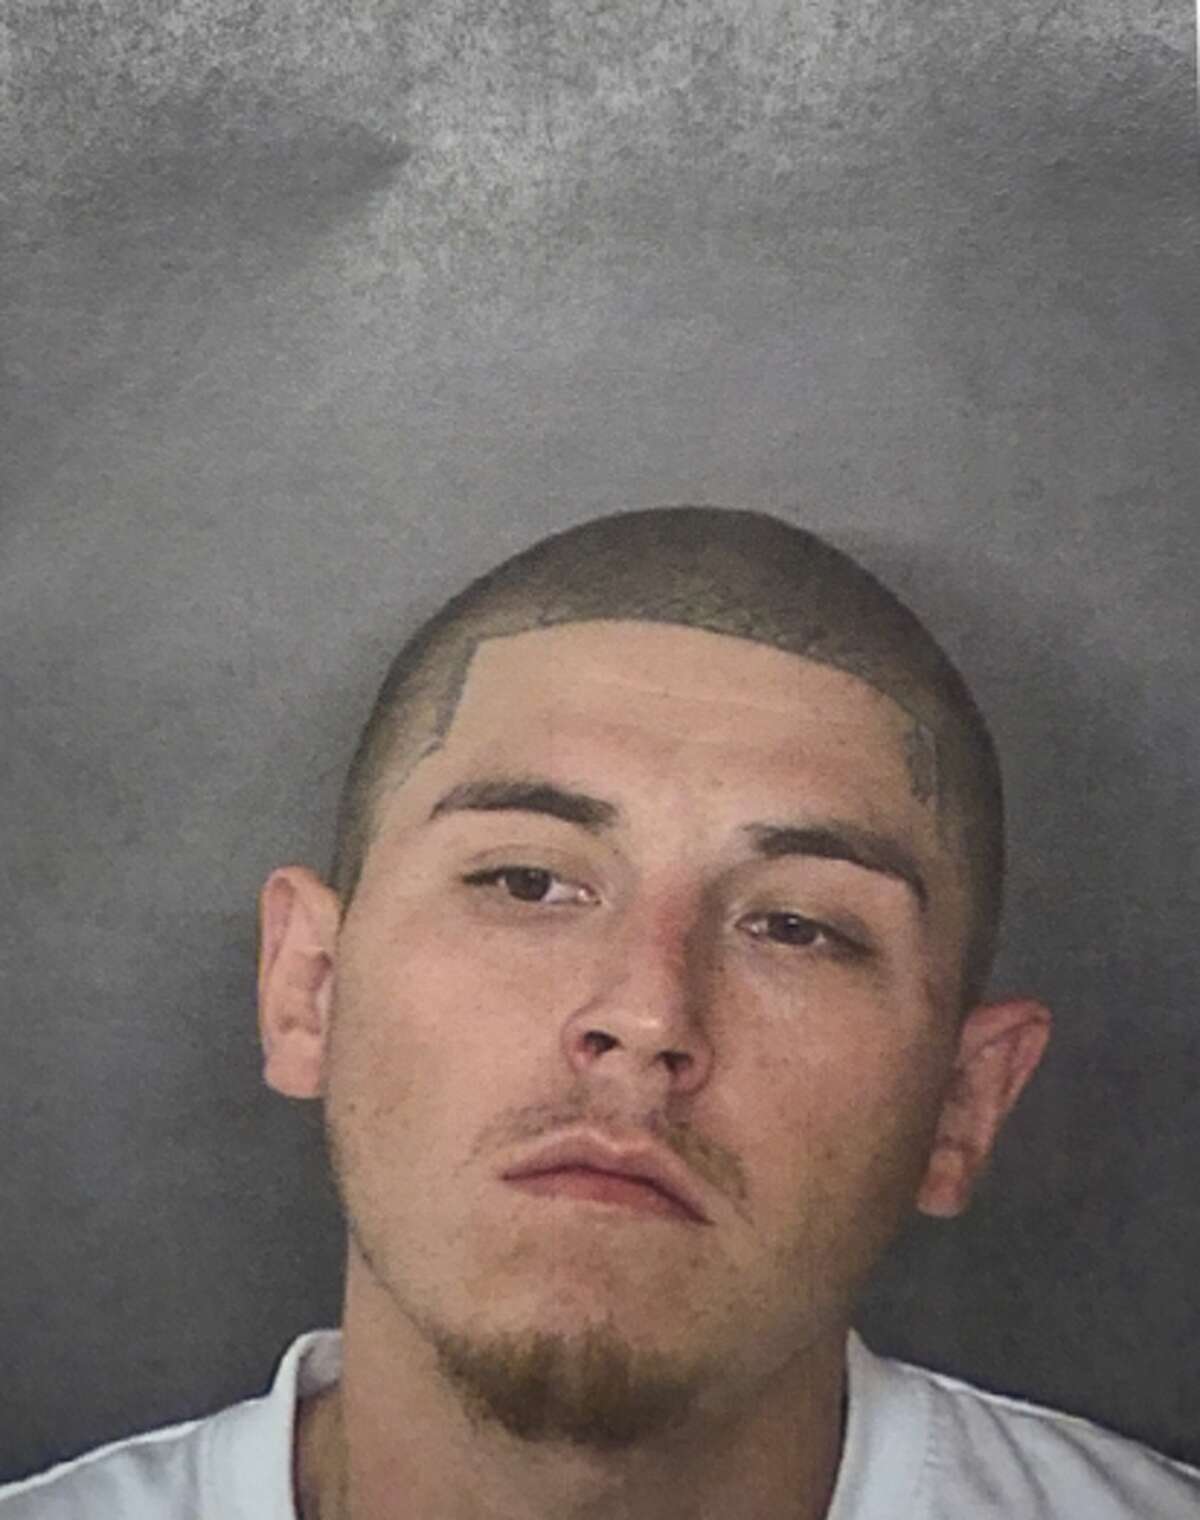 Inmate Eric Trevino escaped the Bexar County Jail on Friday, March 2, 2018, according to the Sheriff's Office.